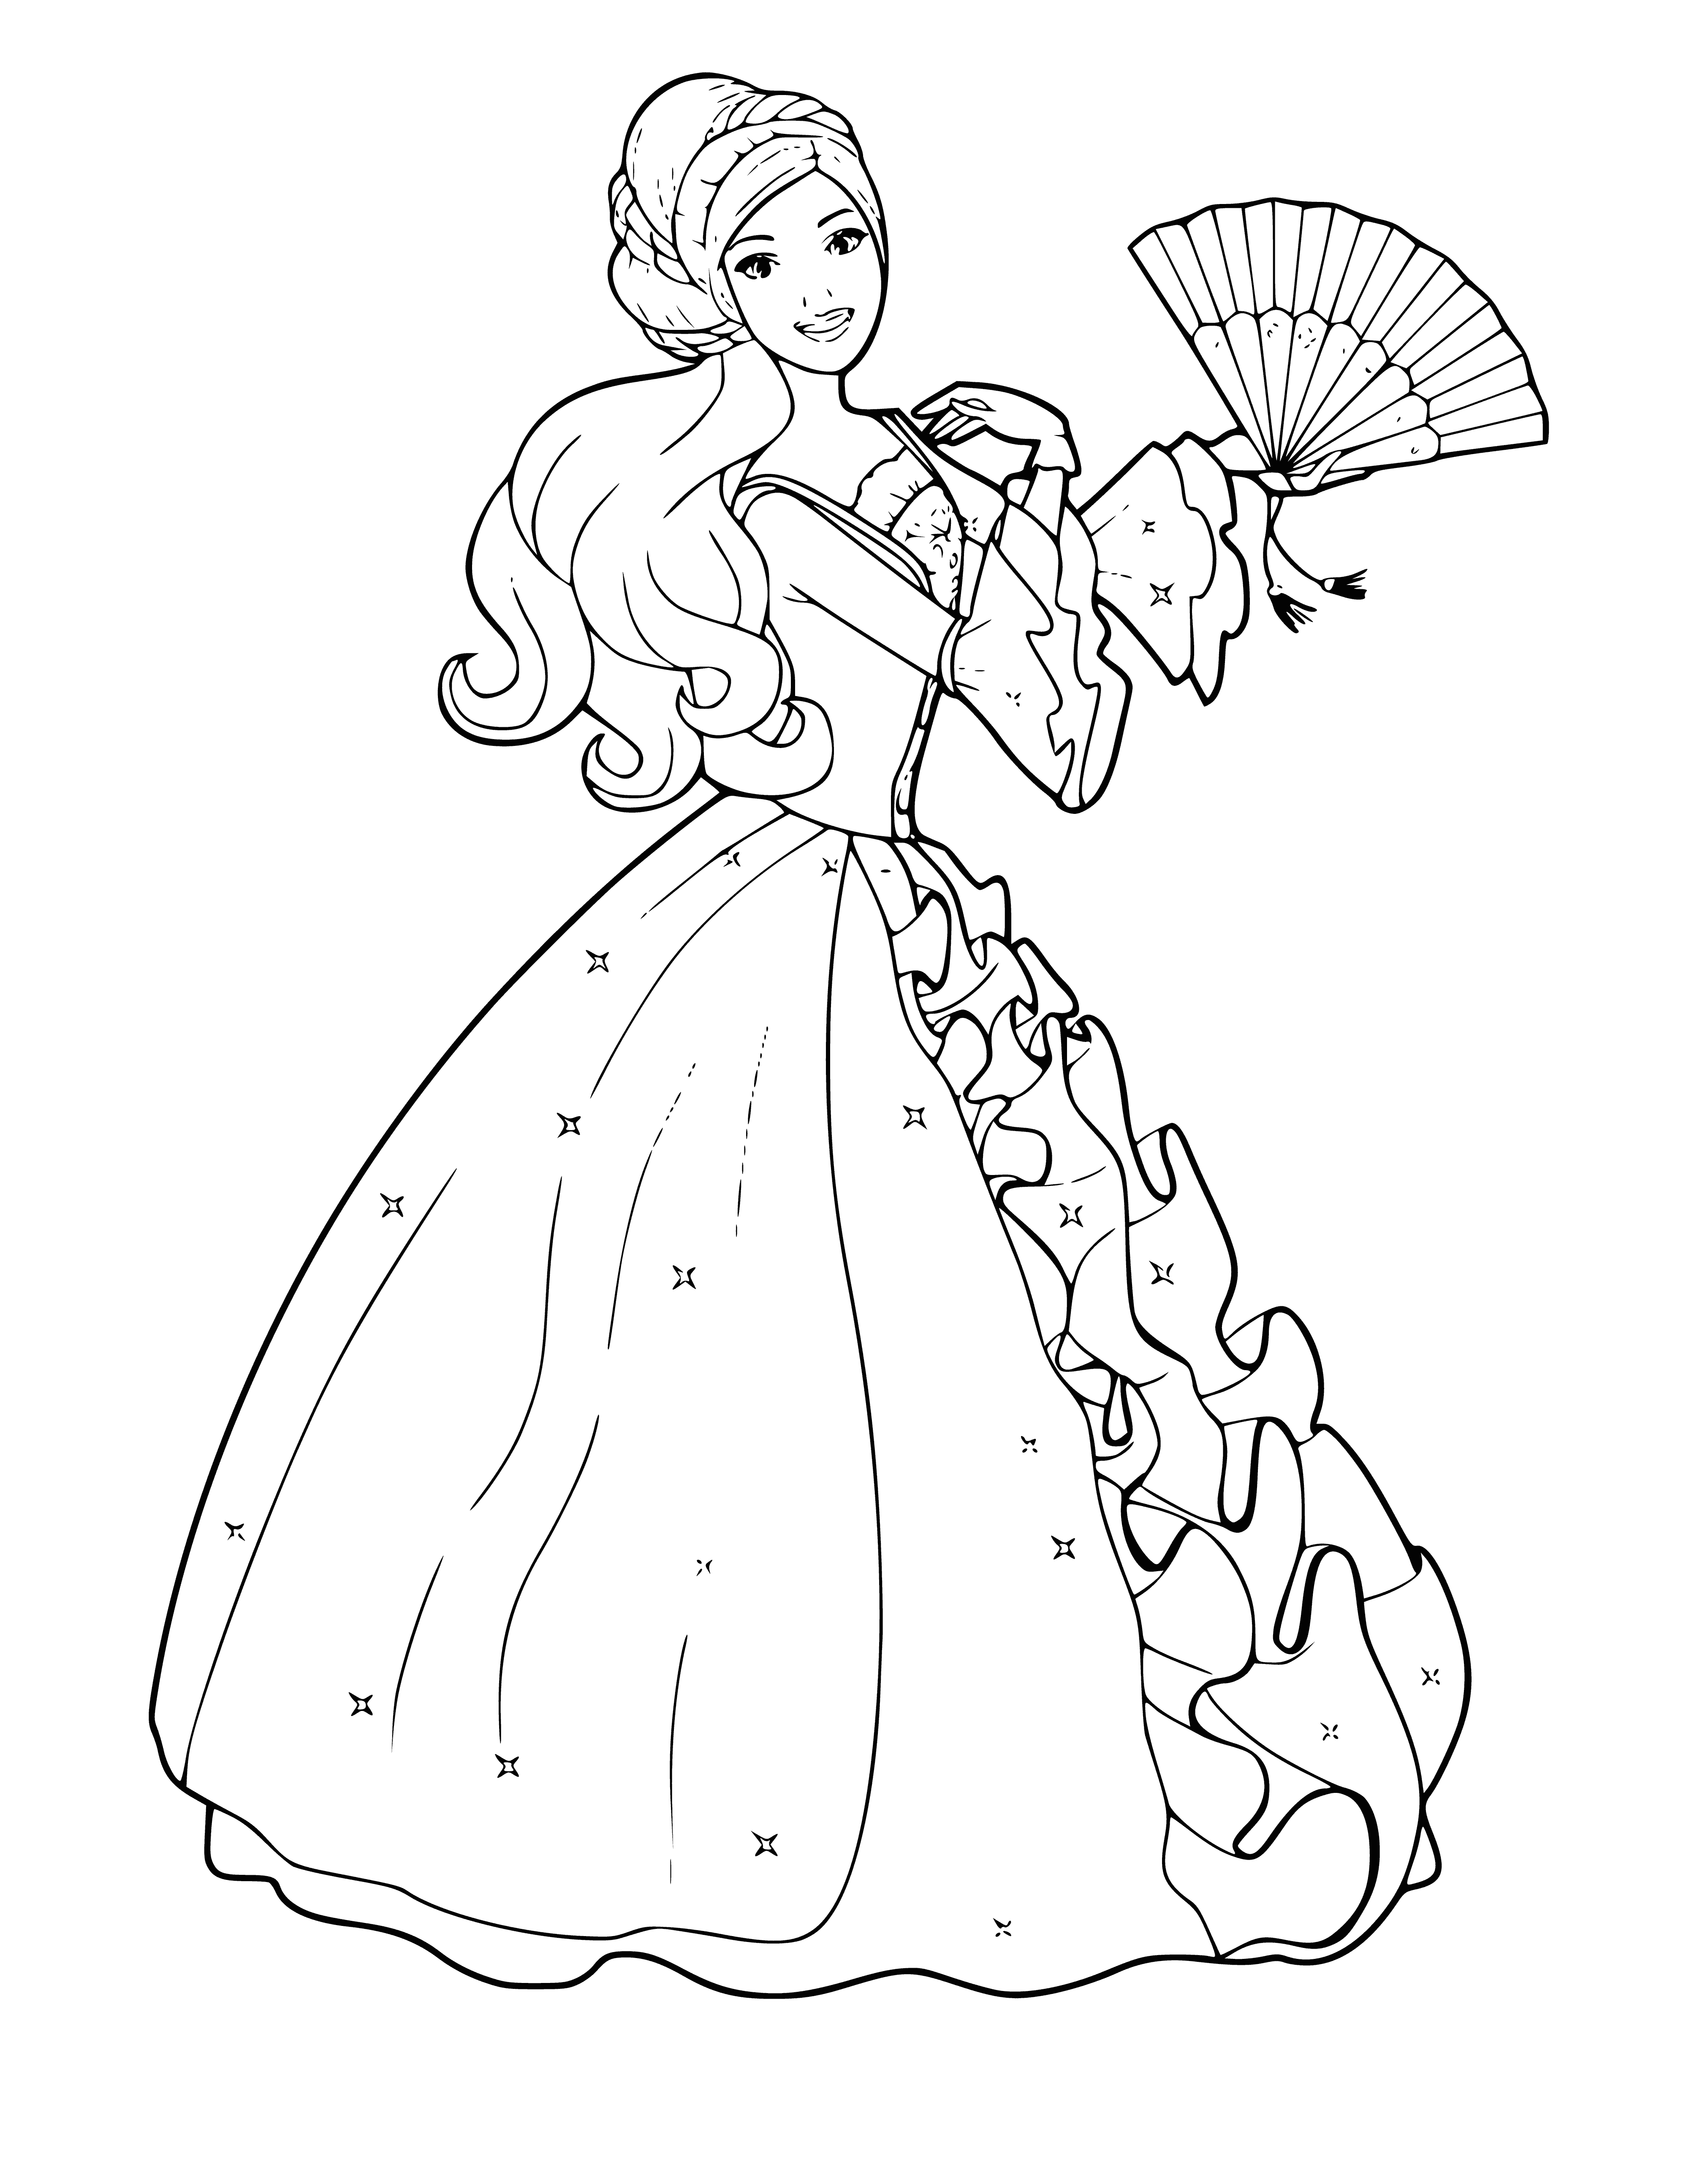 Barbie with a fan coloring page